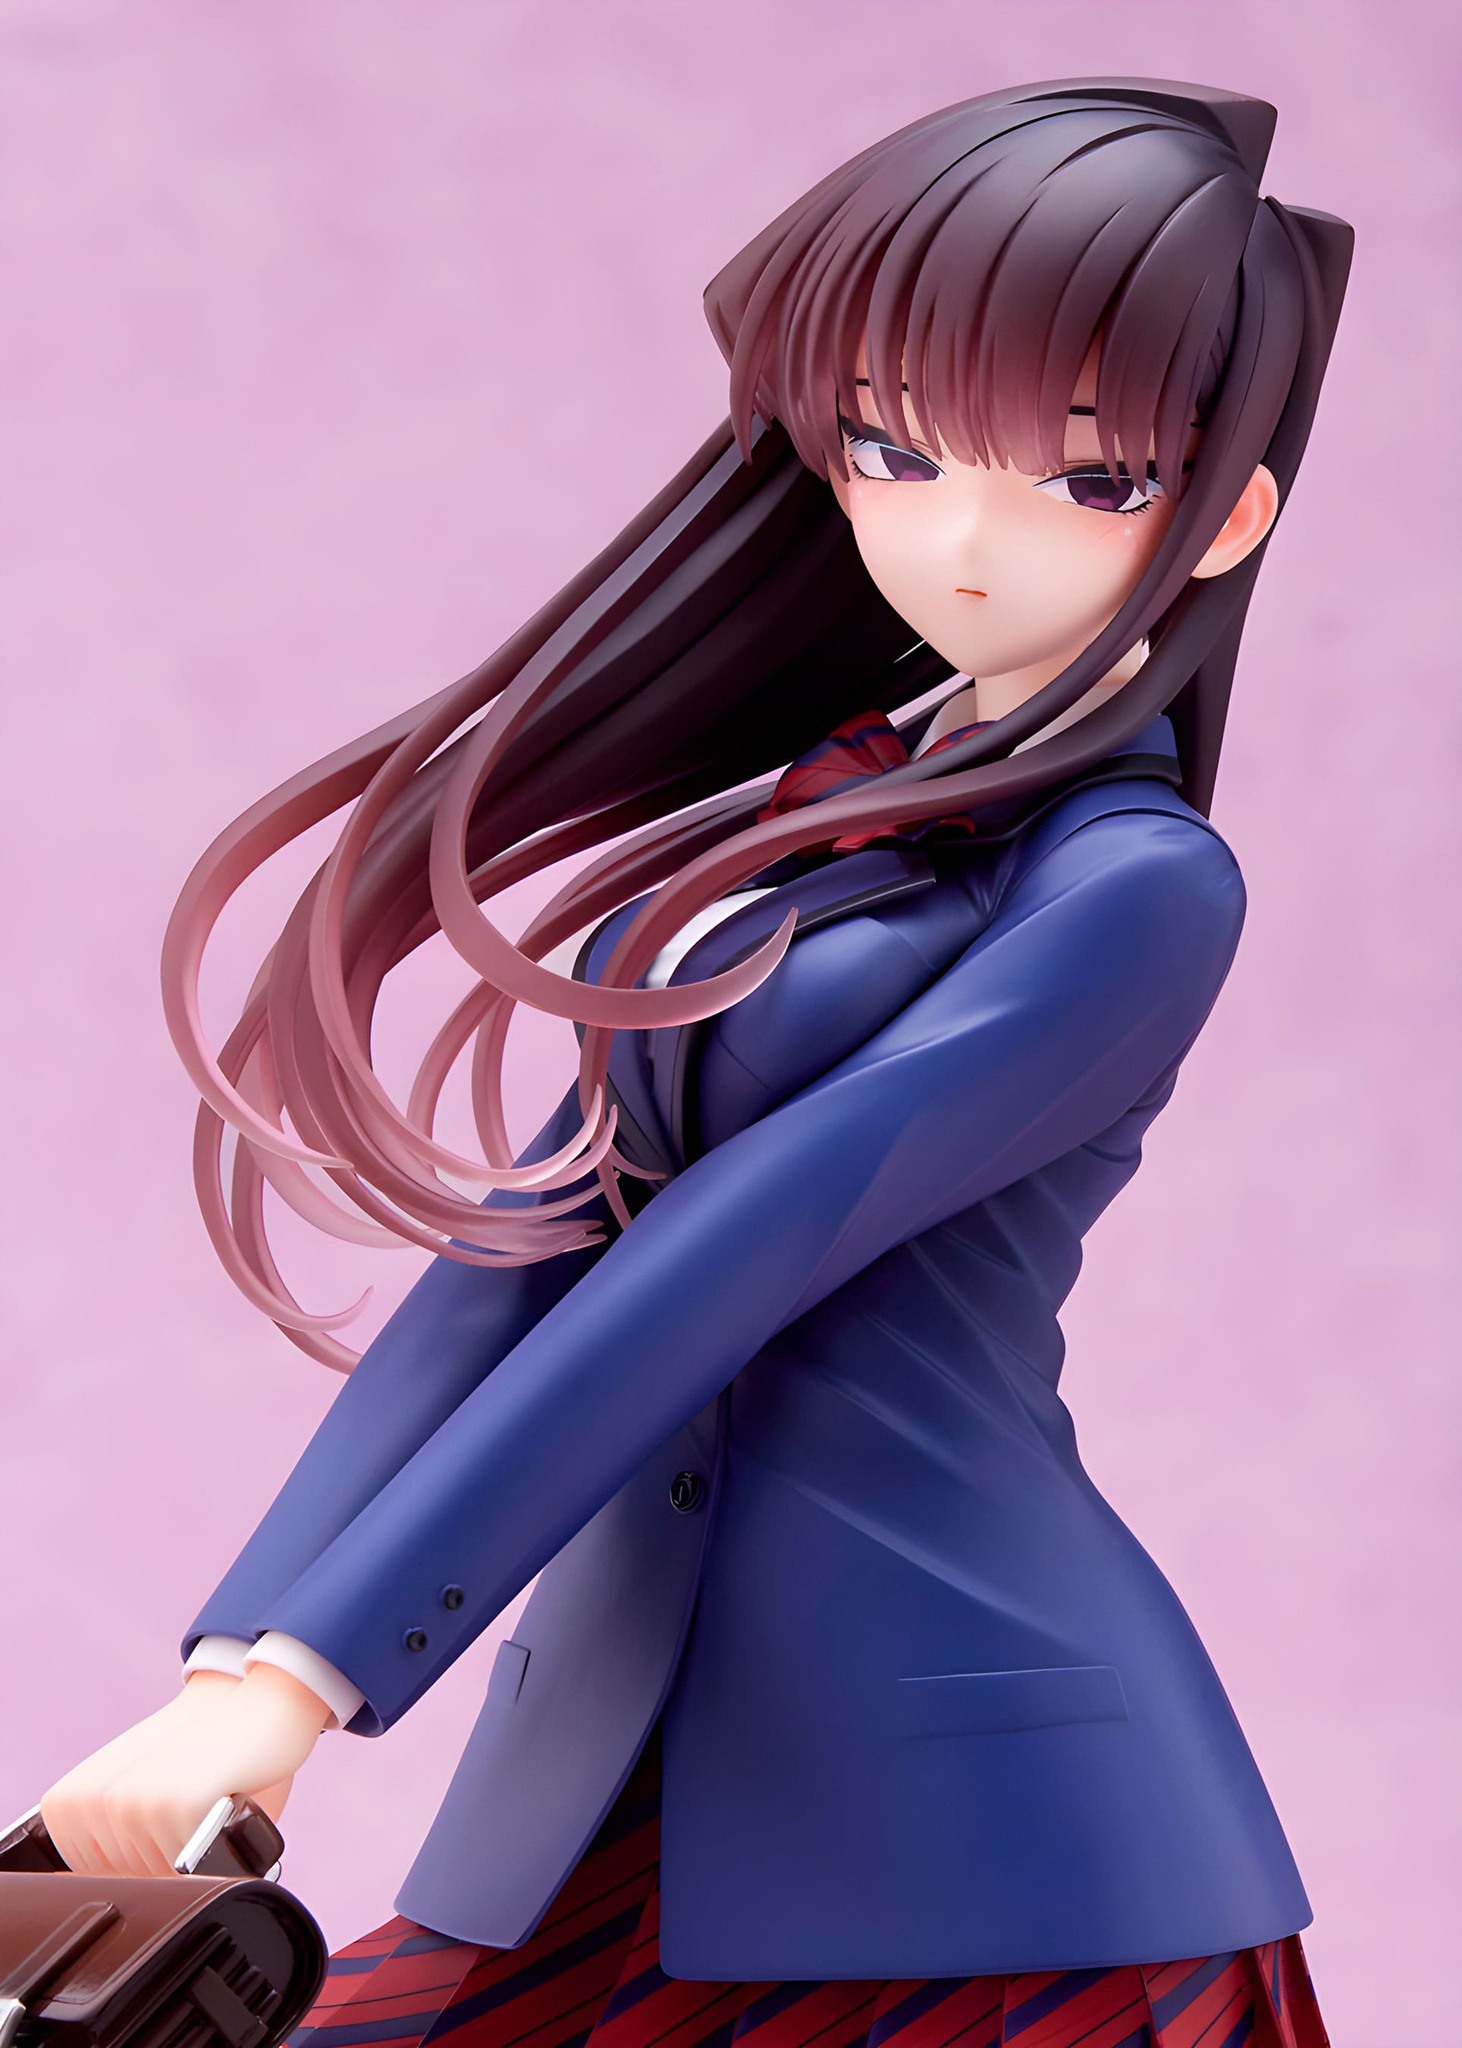 Shouko Komi is available as a scale figure